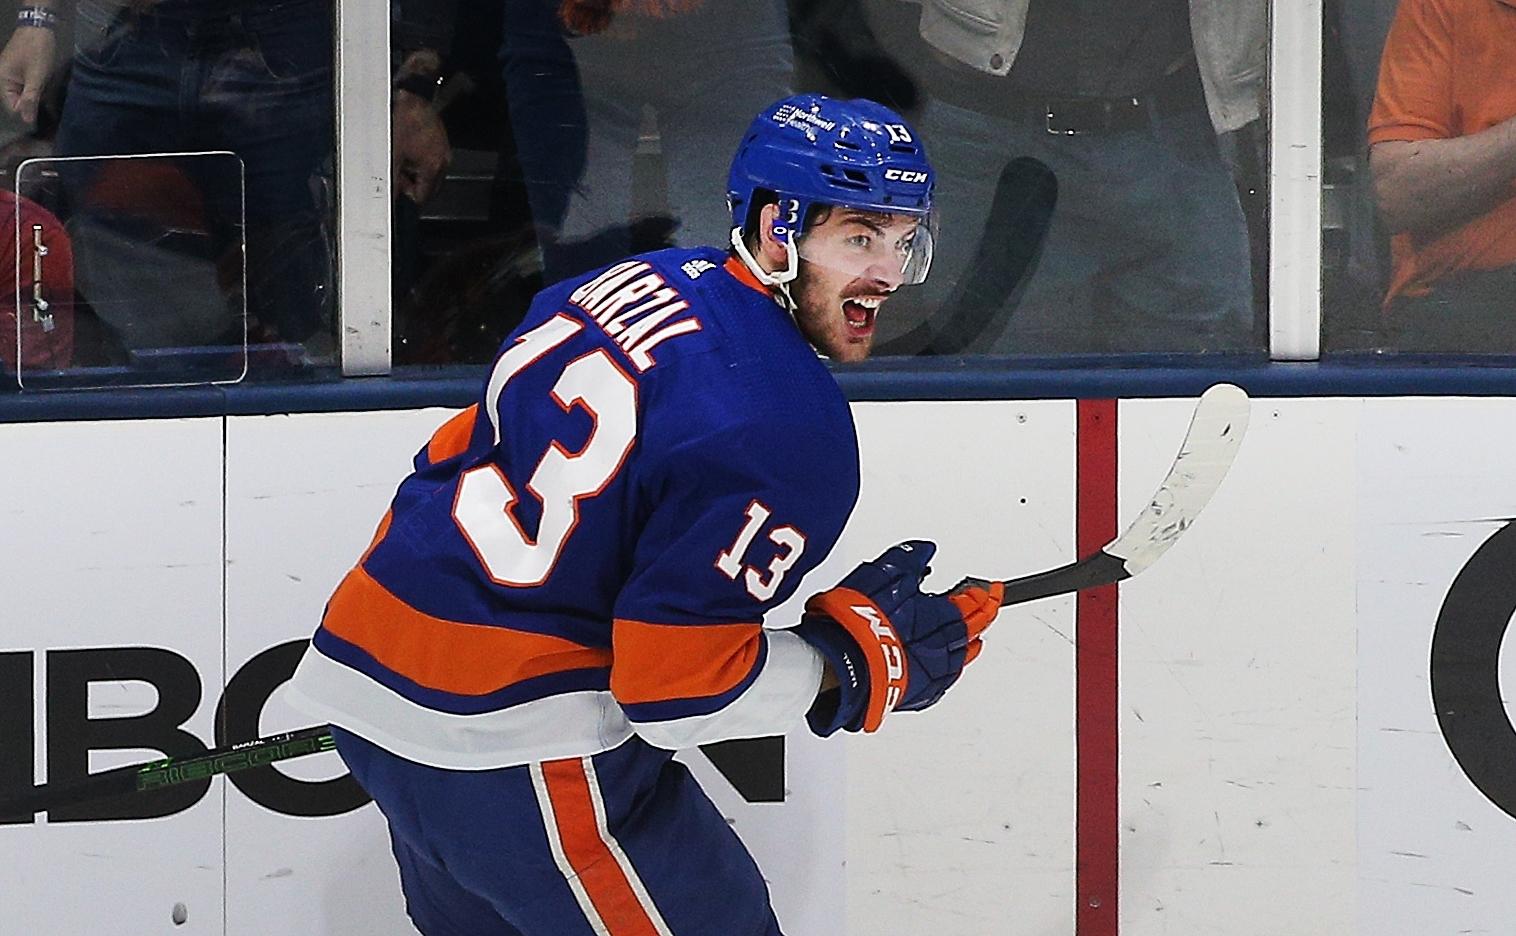 Jun 19, 2021; Uniondale, New York, USA; New York Islanders center Mathew Barzal (13) reacts after scoring a goal against the Tampa Bay Lightning during the second period of game four of the 2021 Stanley Cup Semifinals at Nassau Veterans Memorial Coliseum. Mandatory Credit: Andy Marlin-USA TODAY Sports / Andy Marlin-USA TODAY Sports